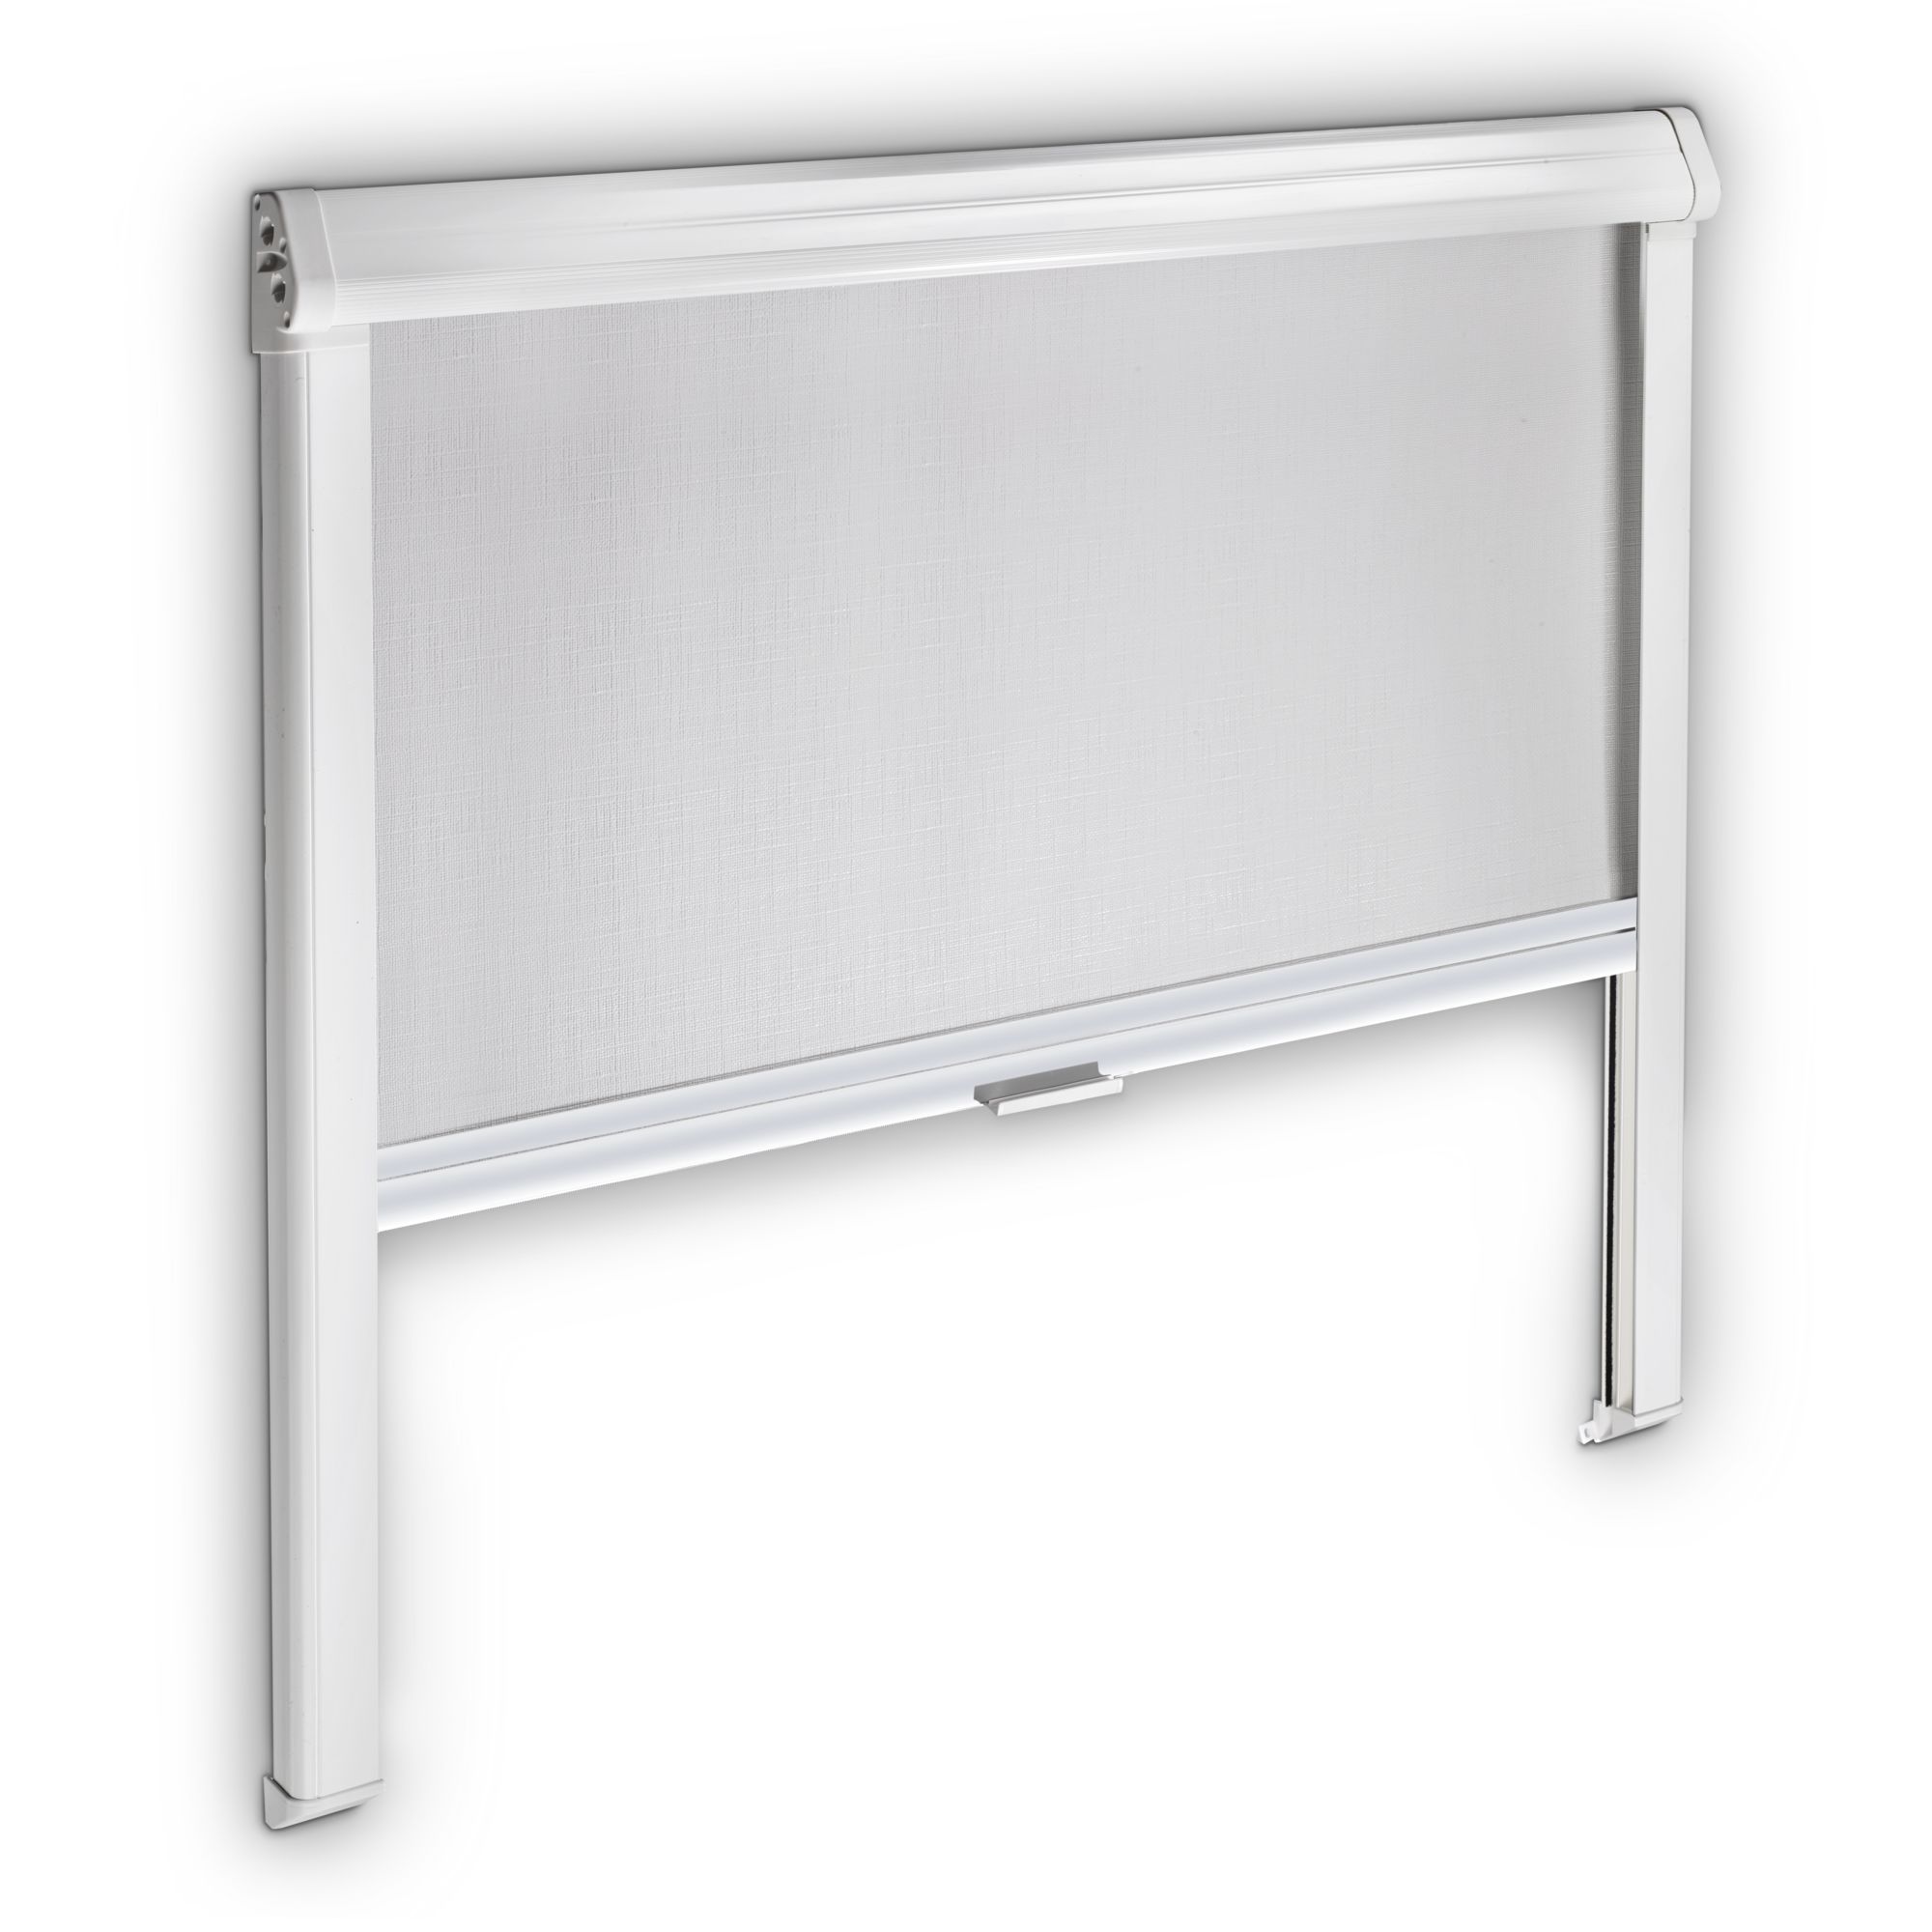 Dometic Black-Out Roller Blind 3000, 1260 x 710 mm, grey-white